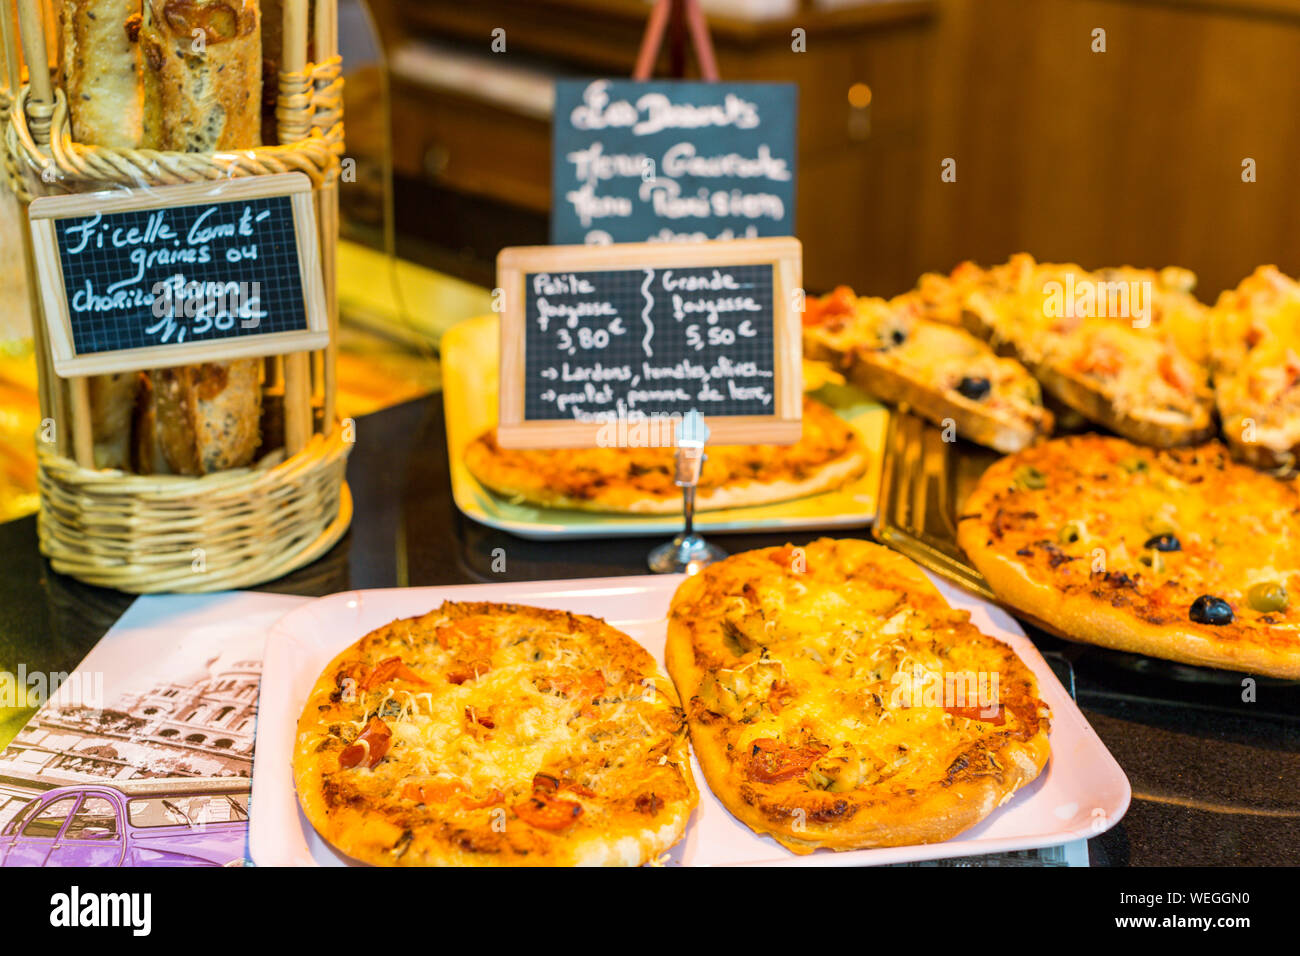 Quiches and baked goods in a bakery in Paris, France Stock Photo